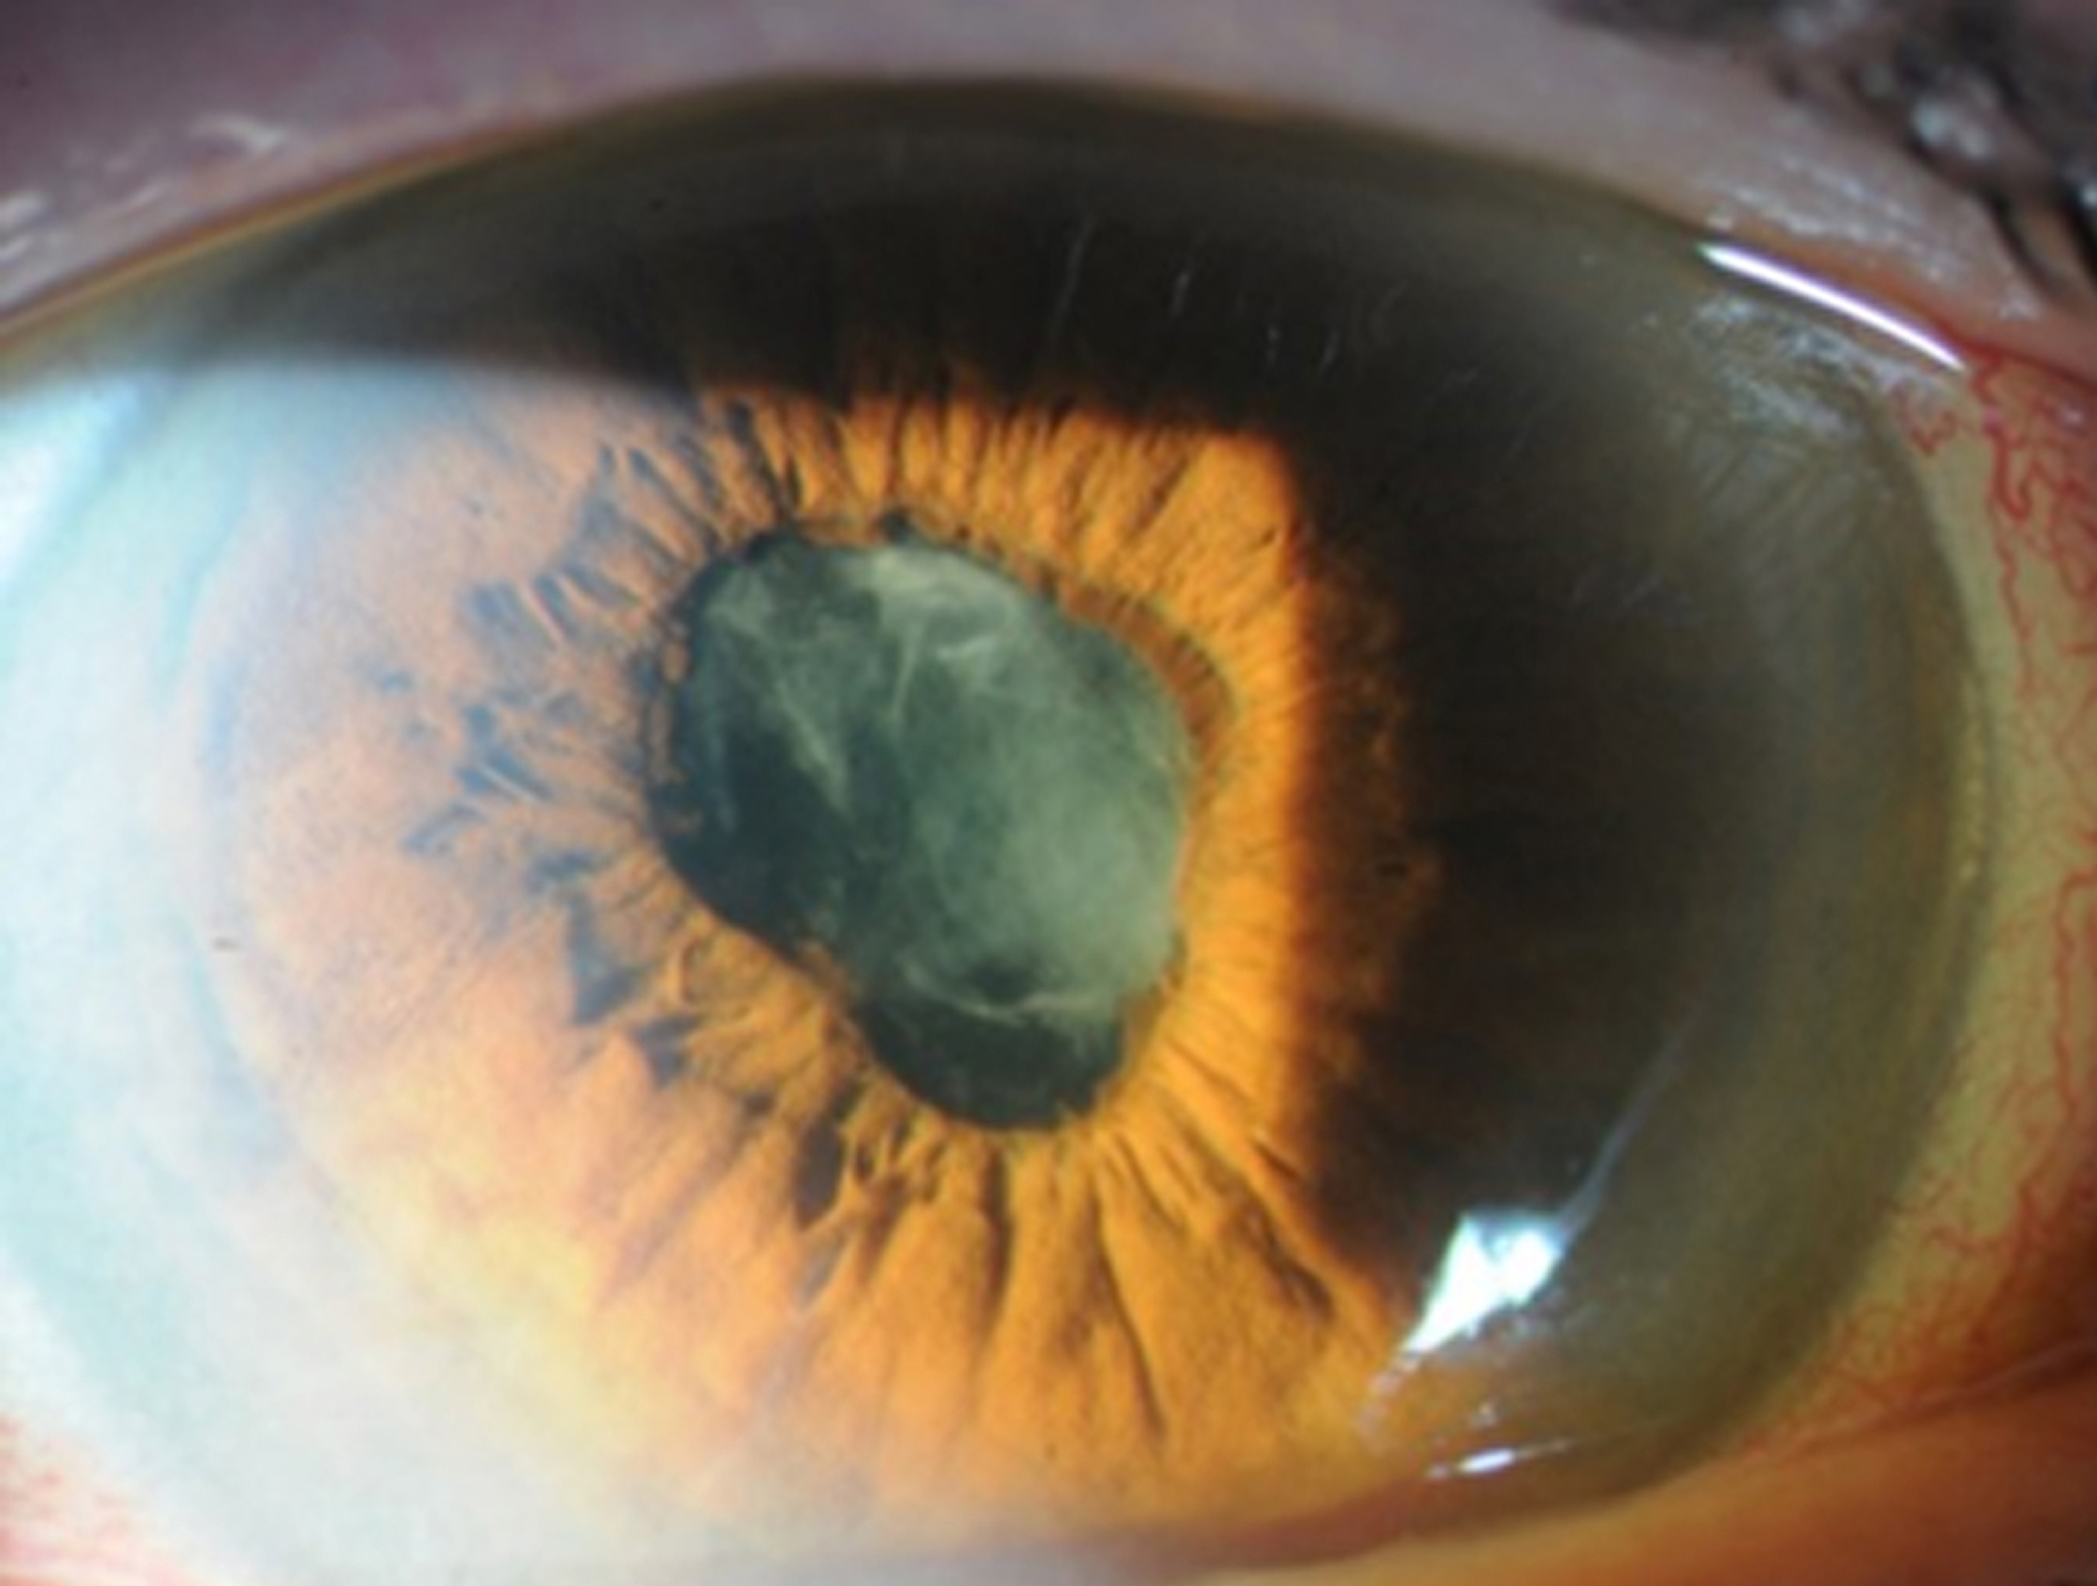 Slit-lamp photograph showing conjunctival injection, corneal edema with Descemet folds, fibrinous anterior chamber reaction in the pupil, and posterior synechiae with a pupillary membrane